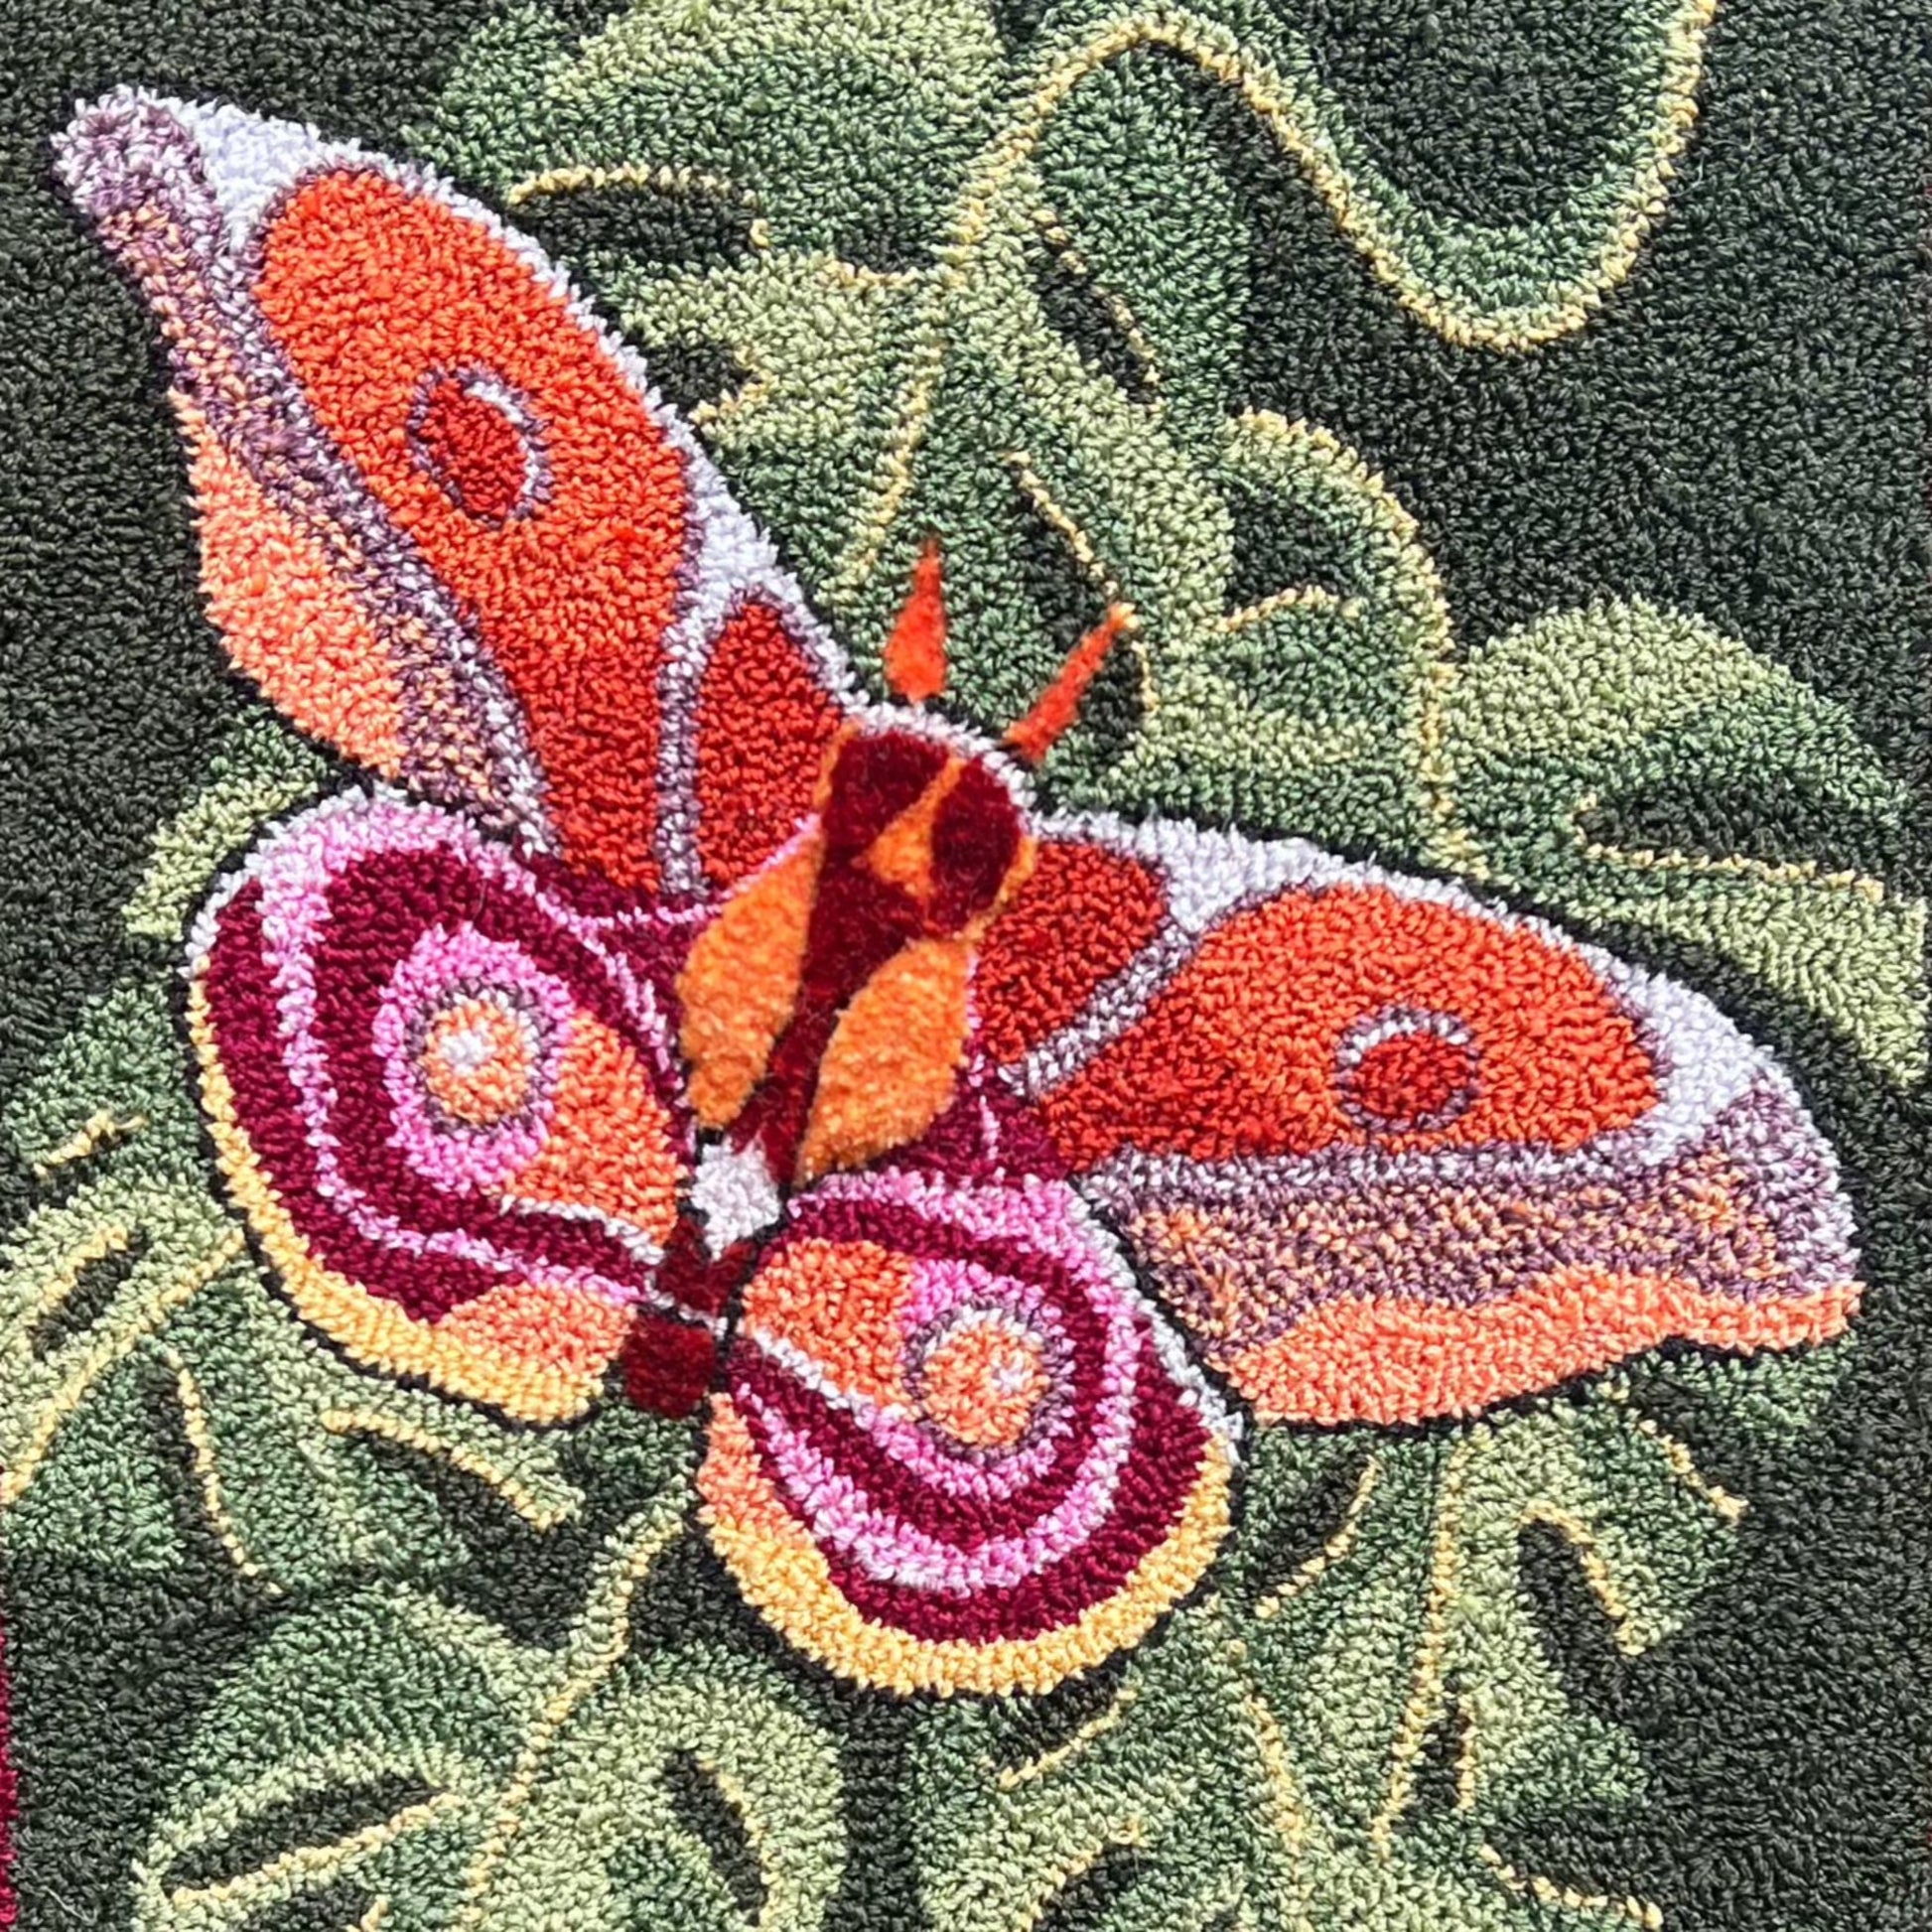 The Bullseye Moth PDF Rug Hooking Digital Download Pattern by Orphaned Wool, copyright 2023 Kelly Kanyok. Create a stunning pillow, rug or wall hanging with this Bullseye Moth design.